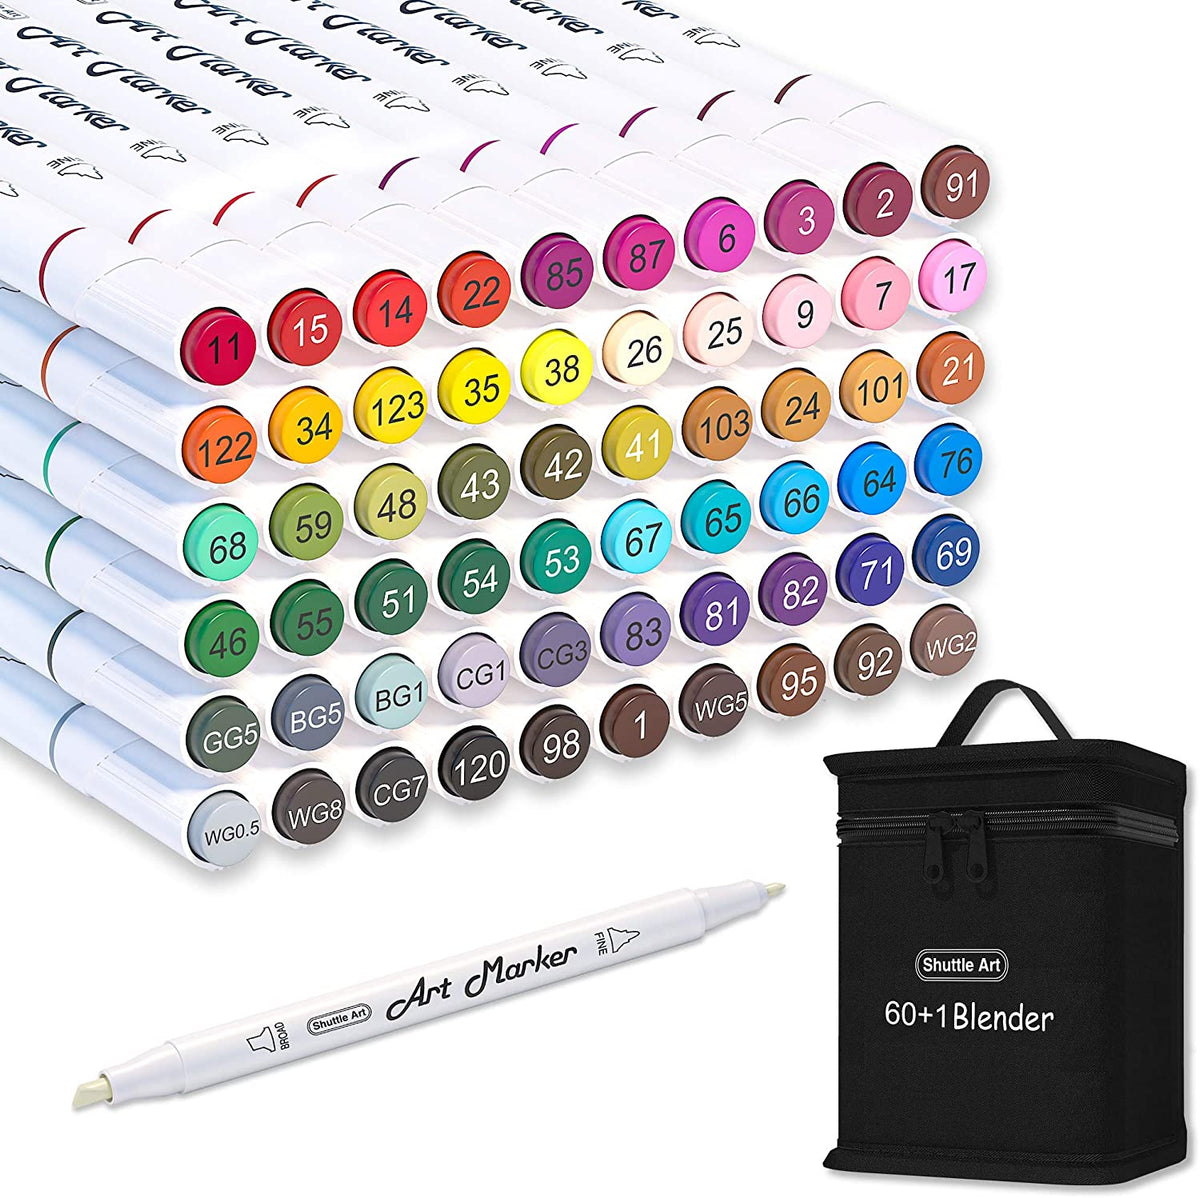  Colored Art Markers,34 Dual Tip Brush Marker Pens